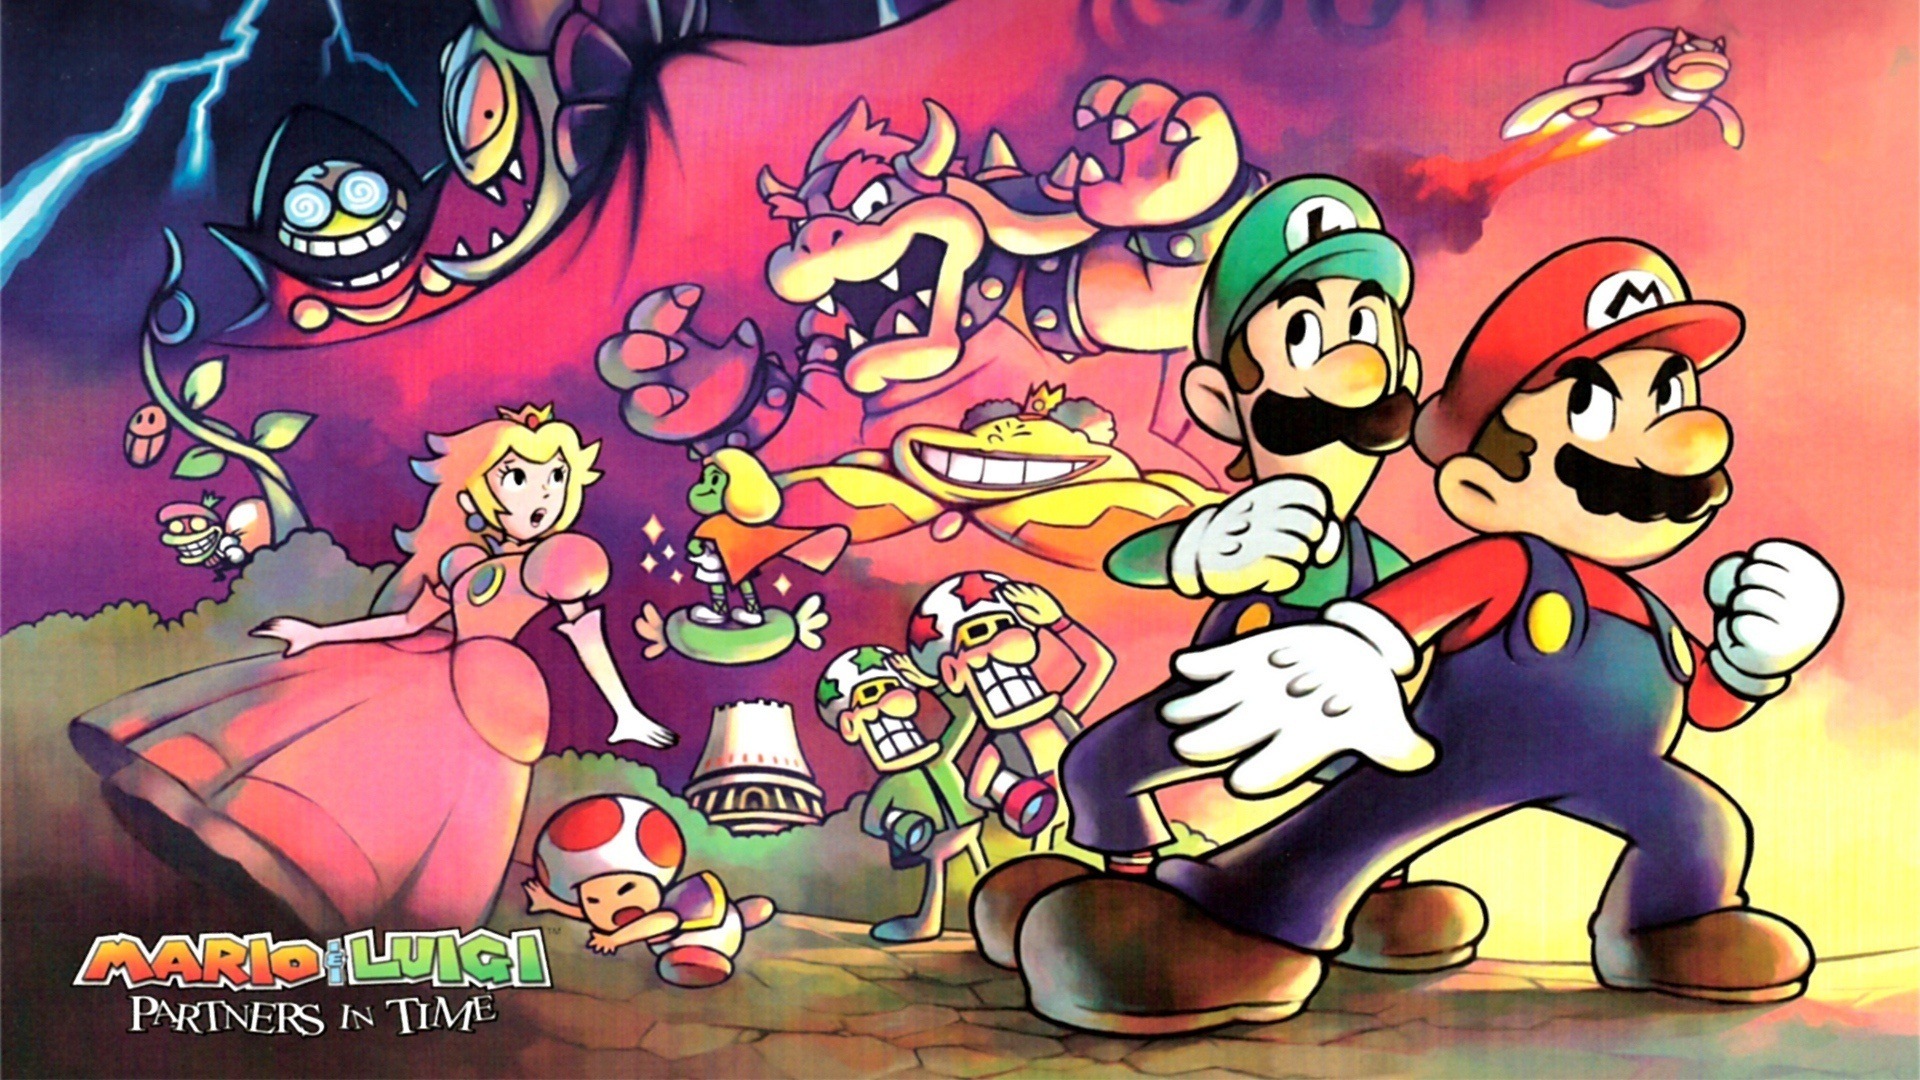 Mario and Luigi: Partners Time - Wii VC footage | The GoNintendo Archives GoNintendo